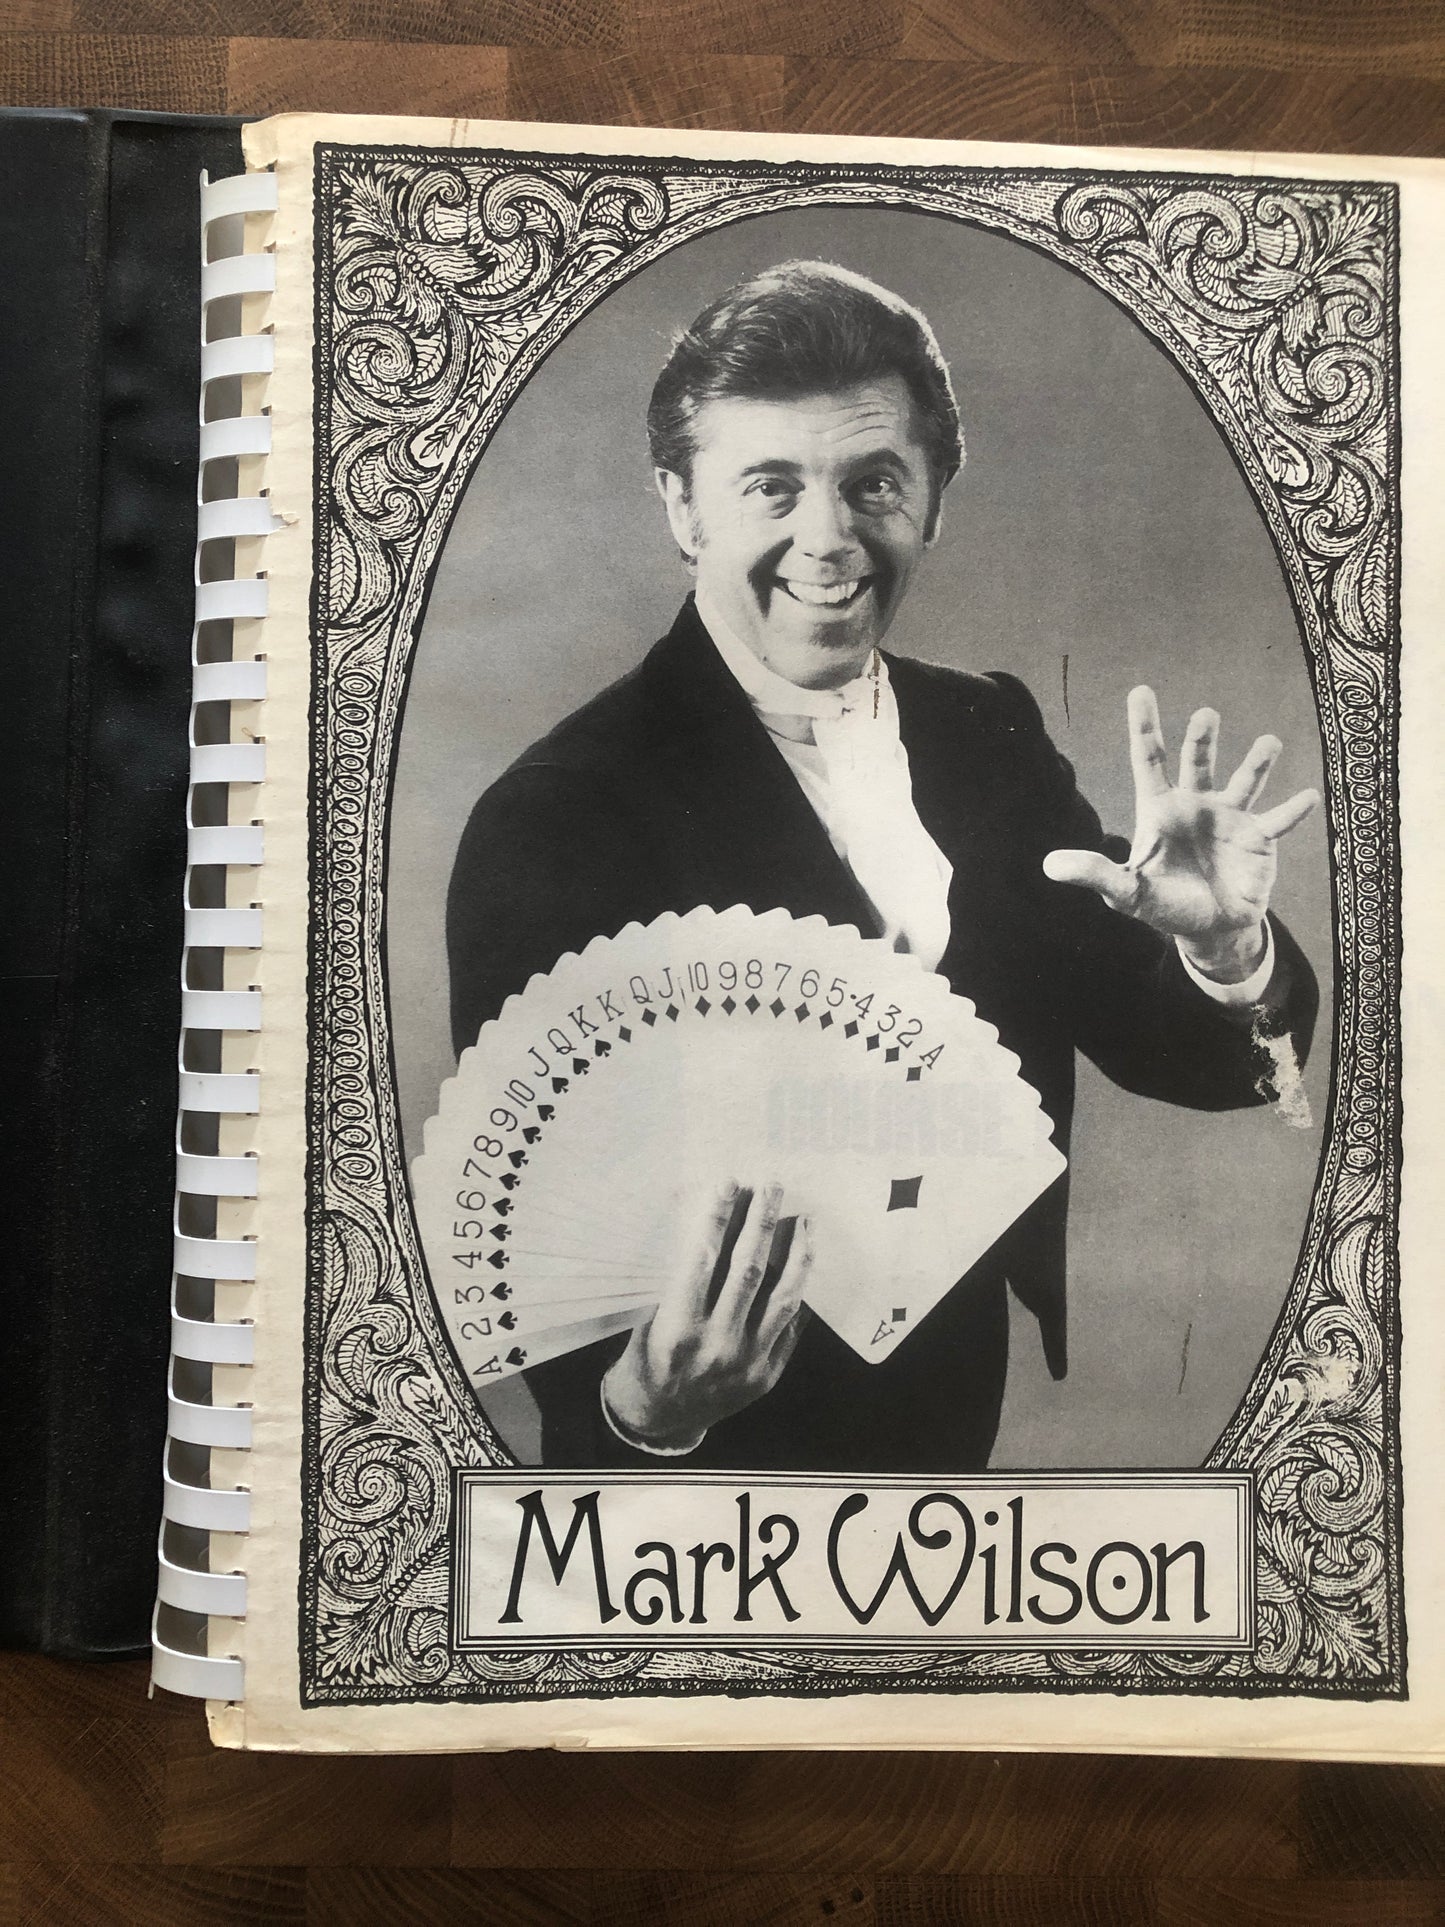 Mark Wilson Course in Magic (early edition)